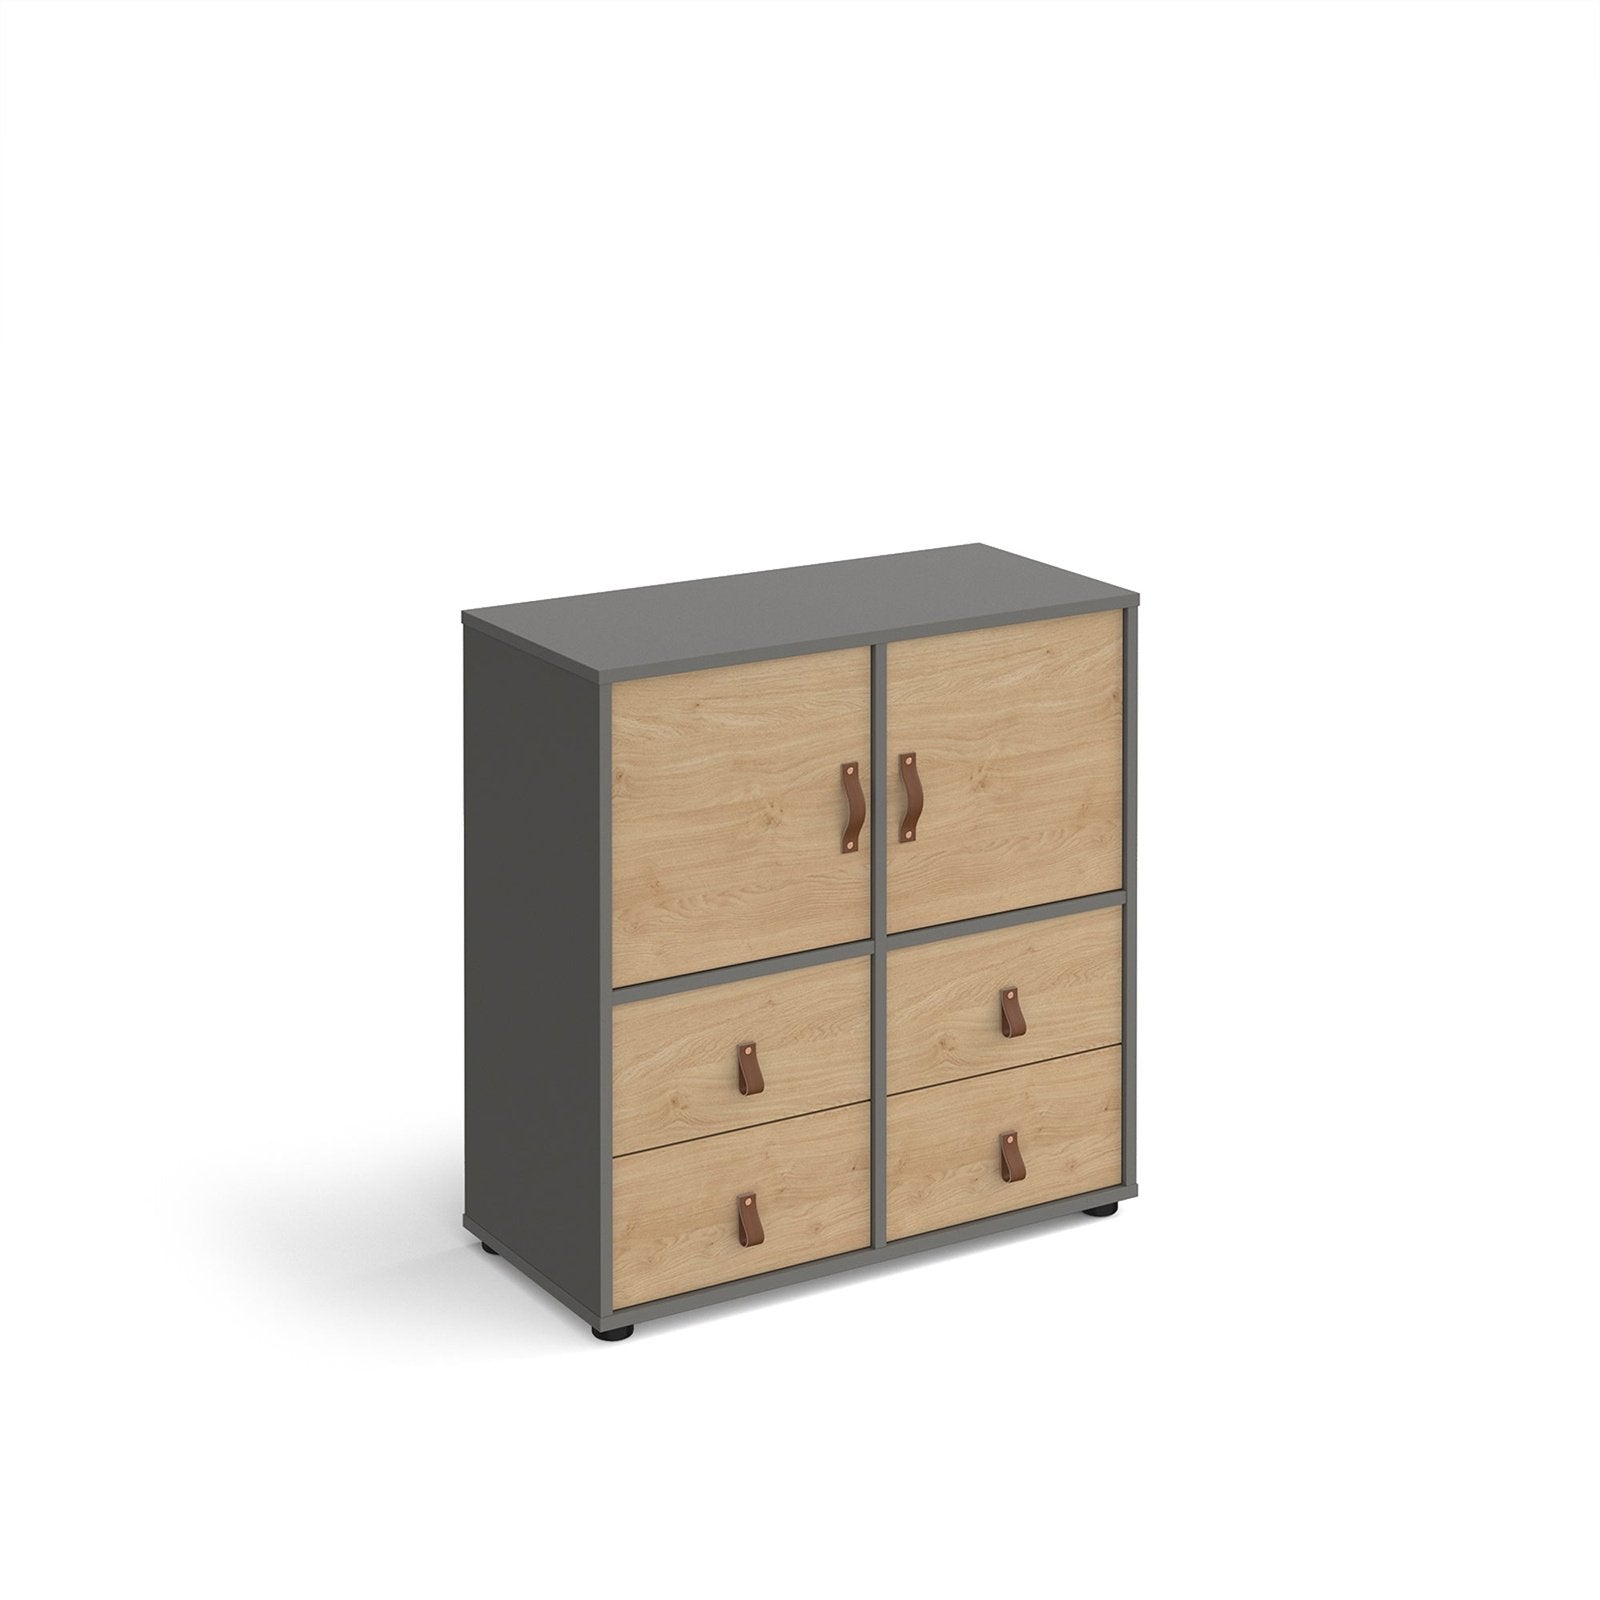 Universal cube storage unit 875mm high on glides with cupboards and 2 sets of drawers - Office Products Online